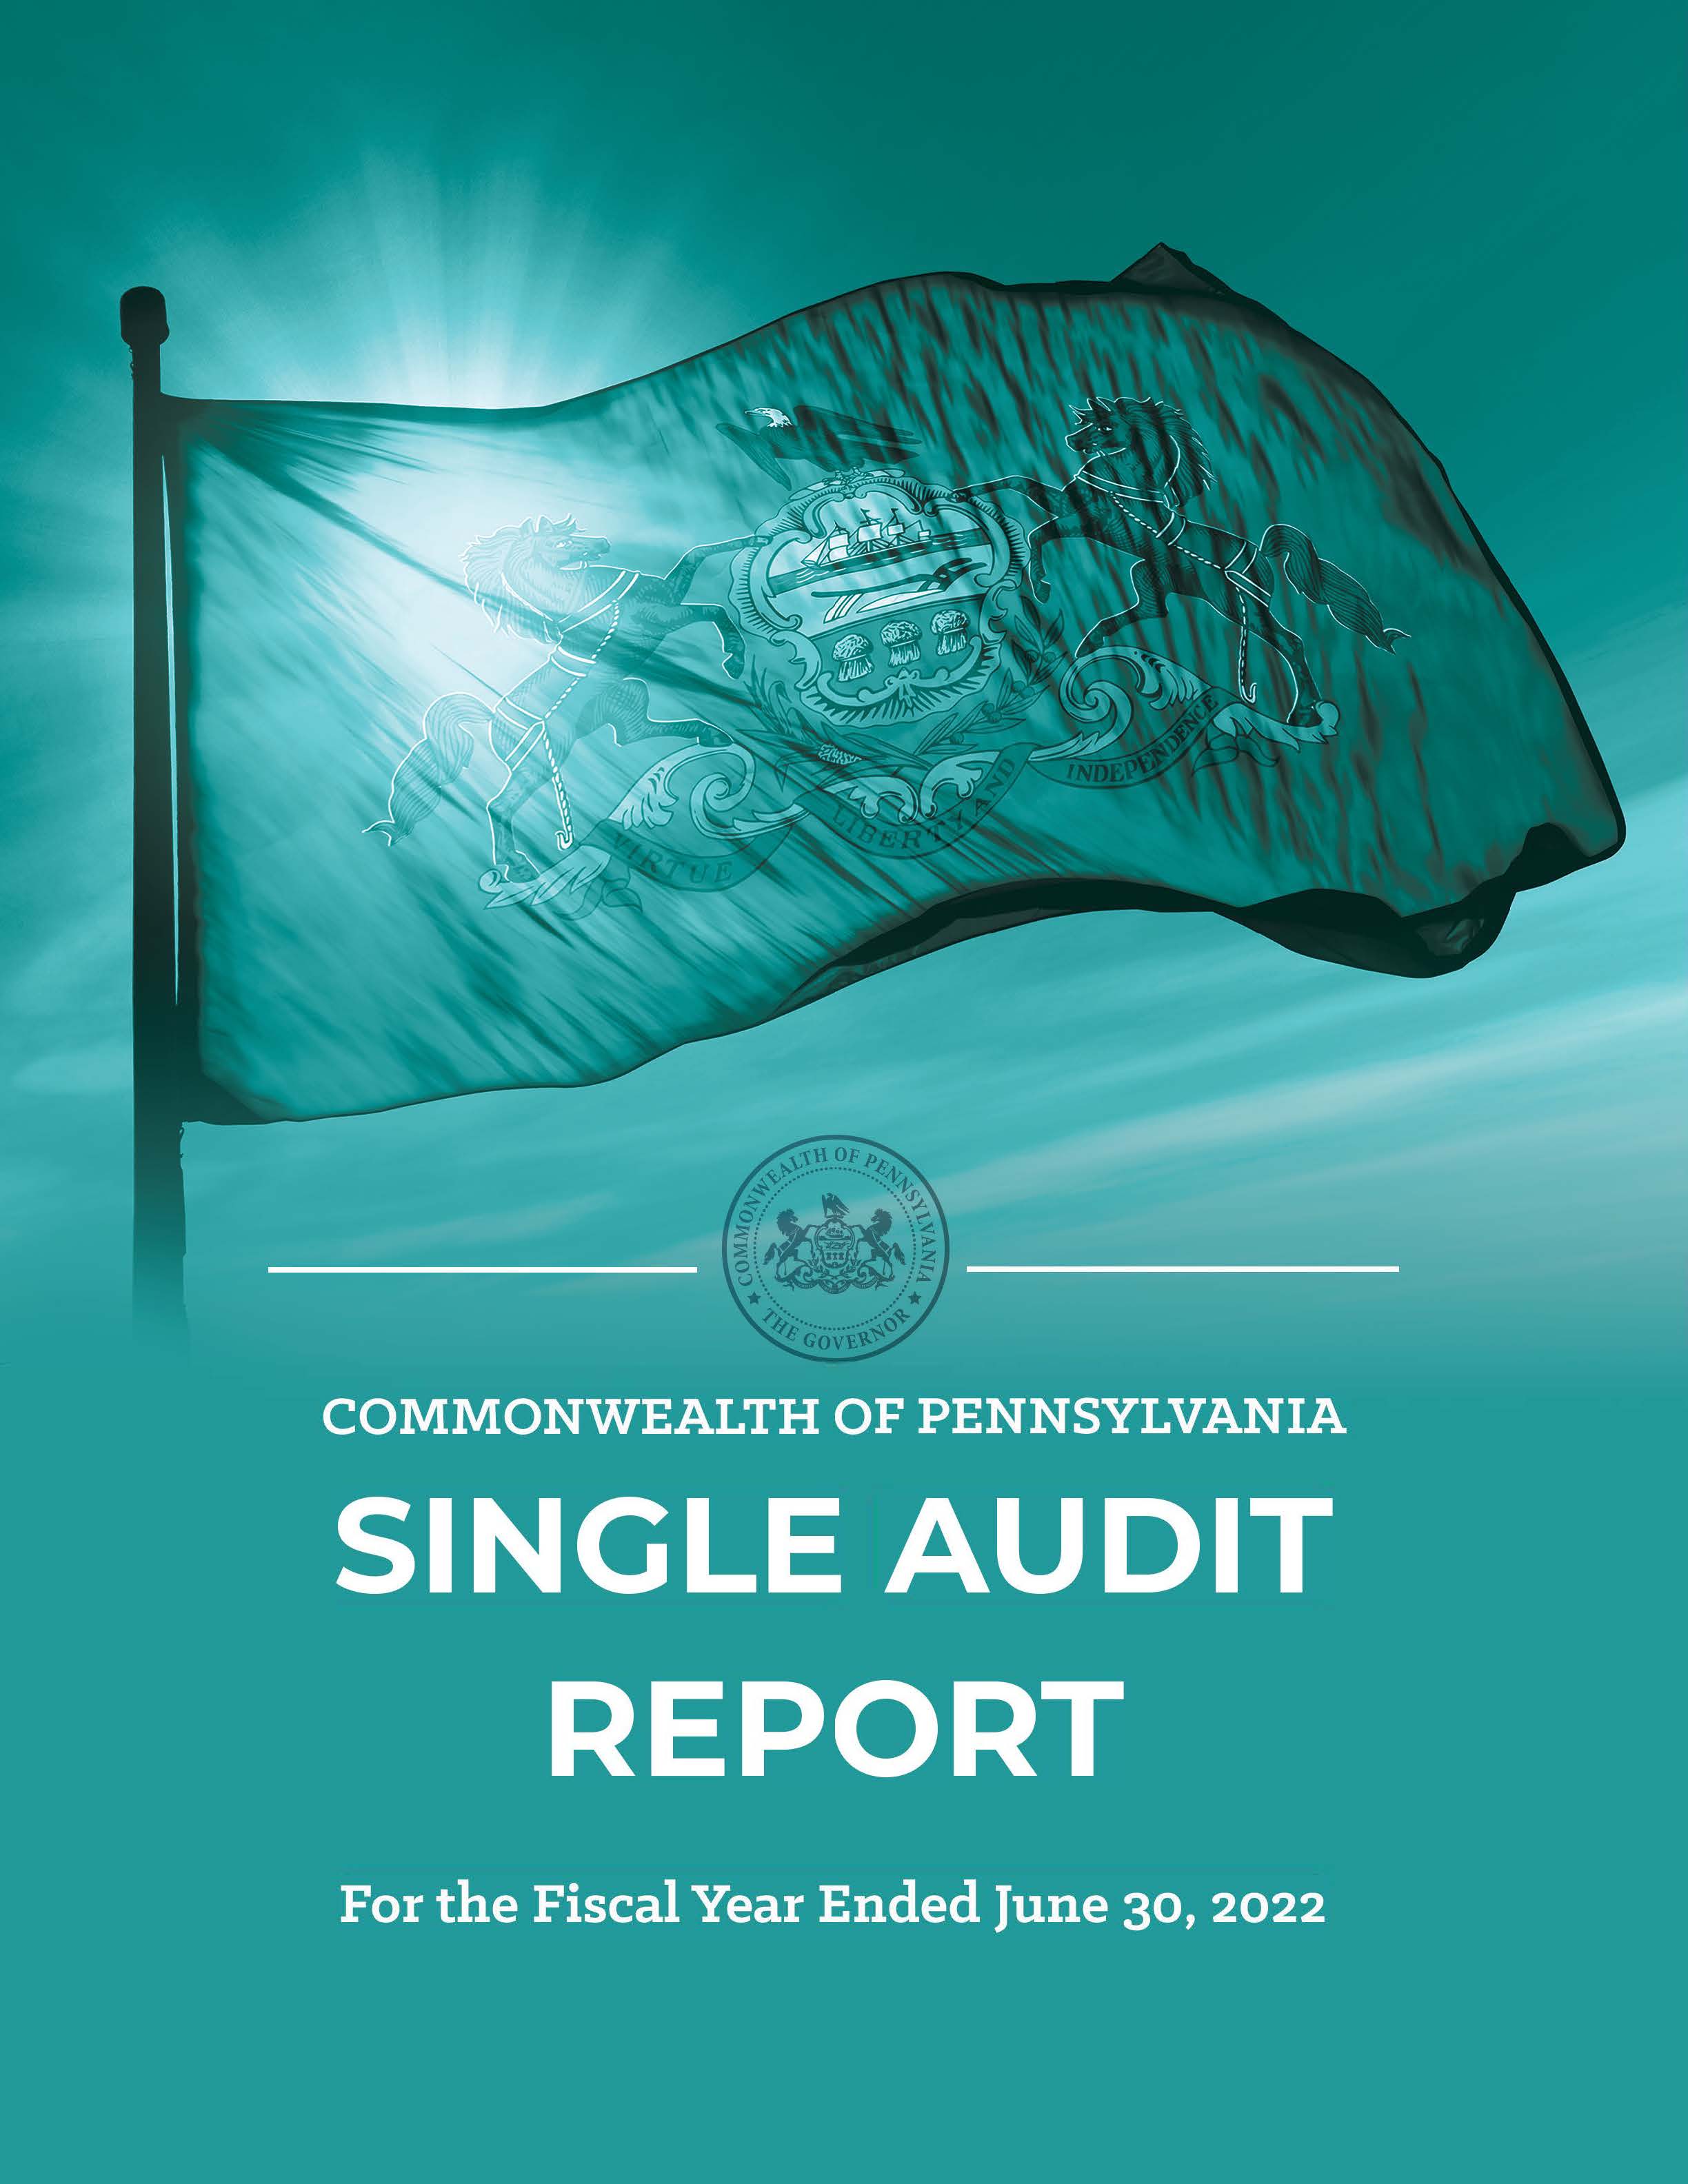 Image of the June 30, 2021 Single Audit Report Cover